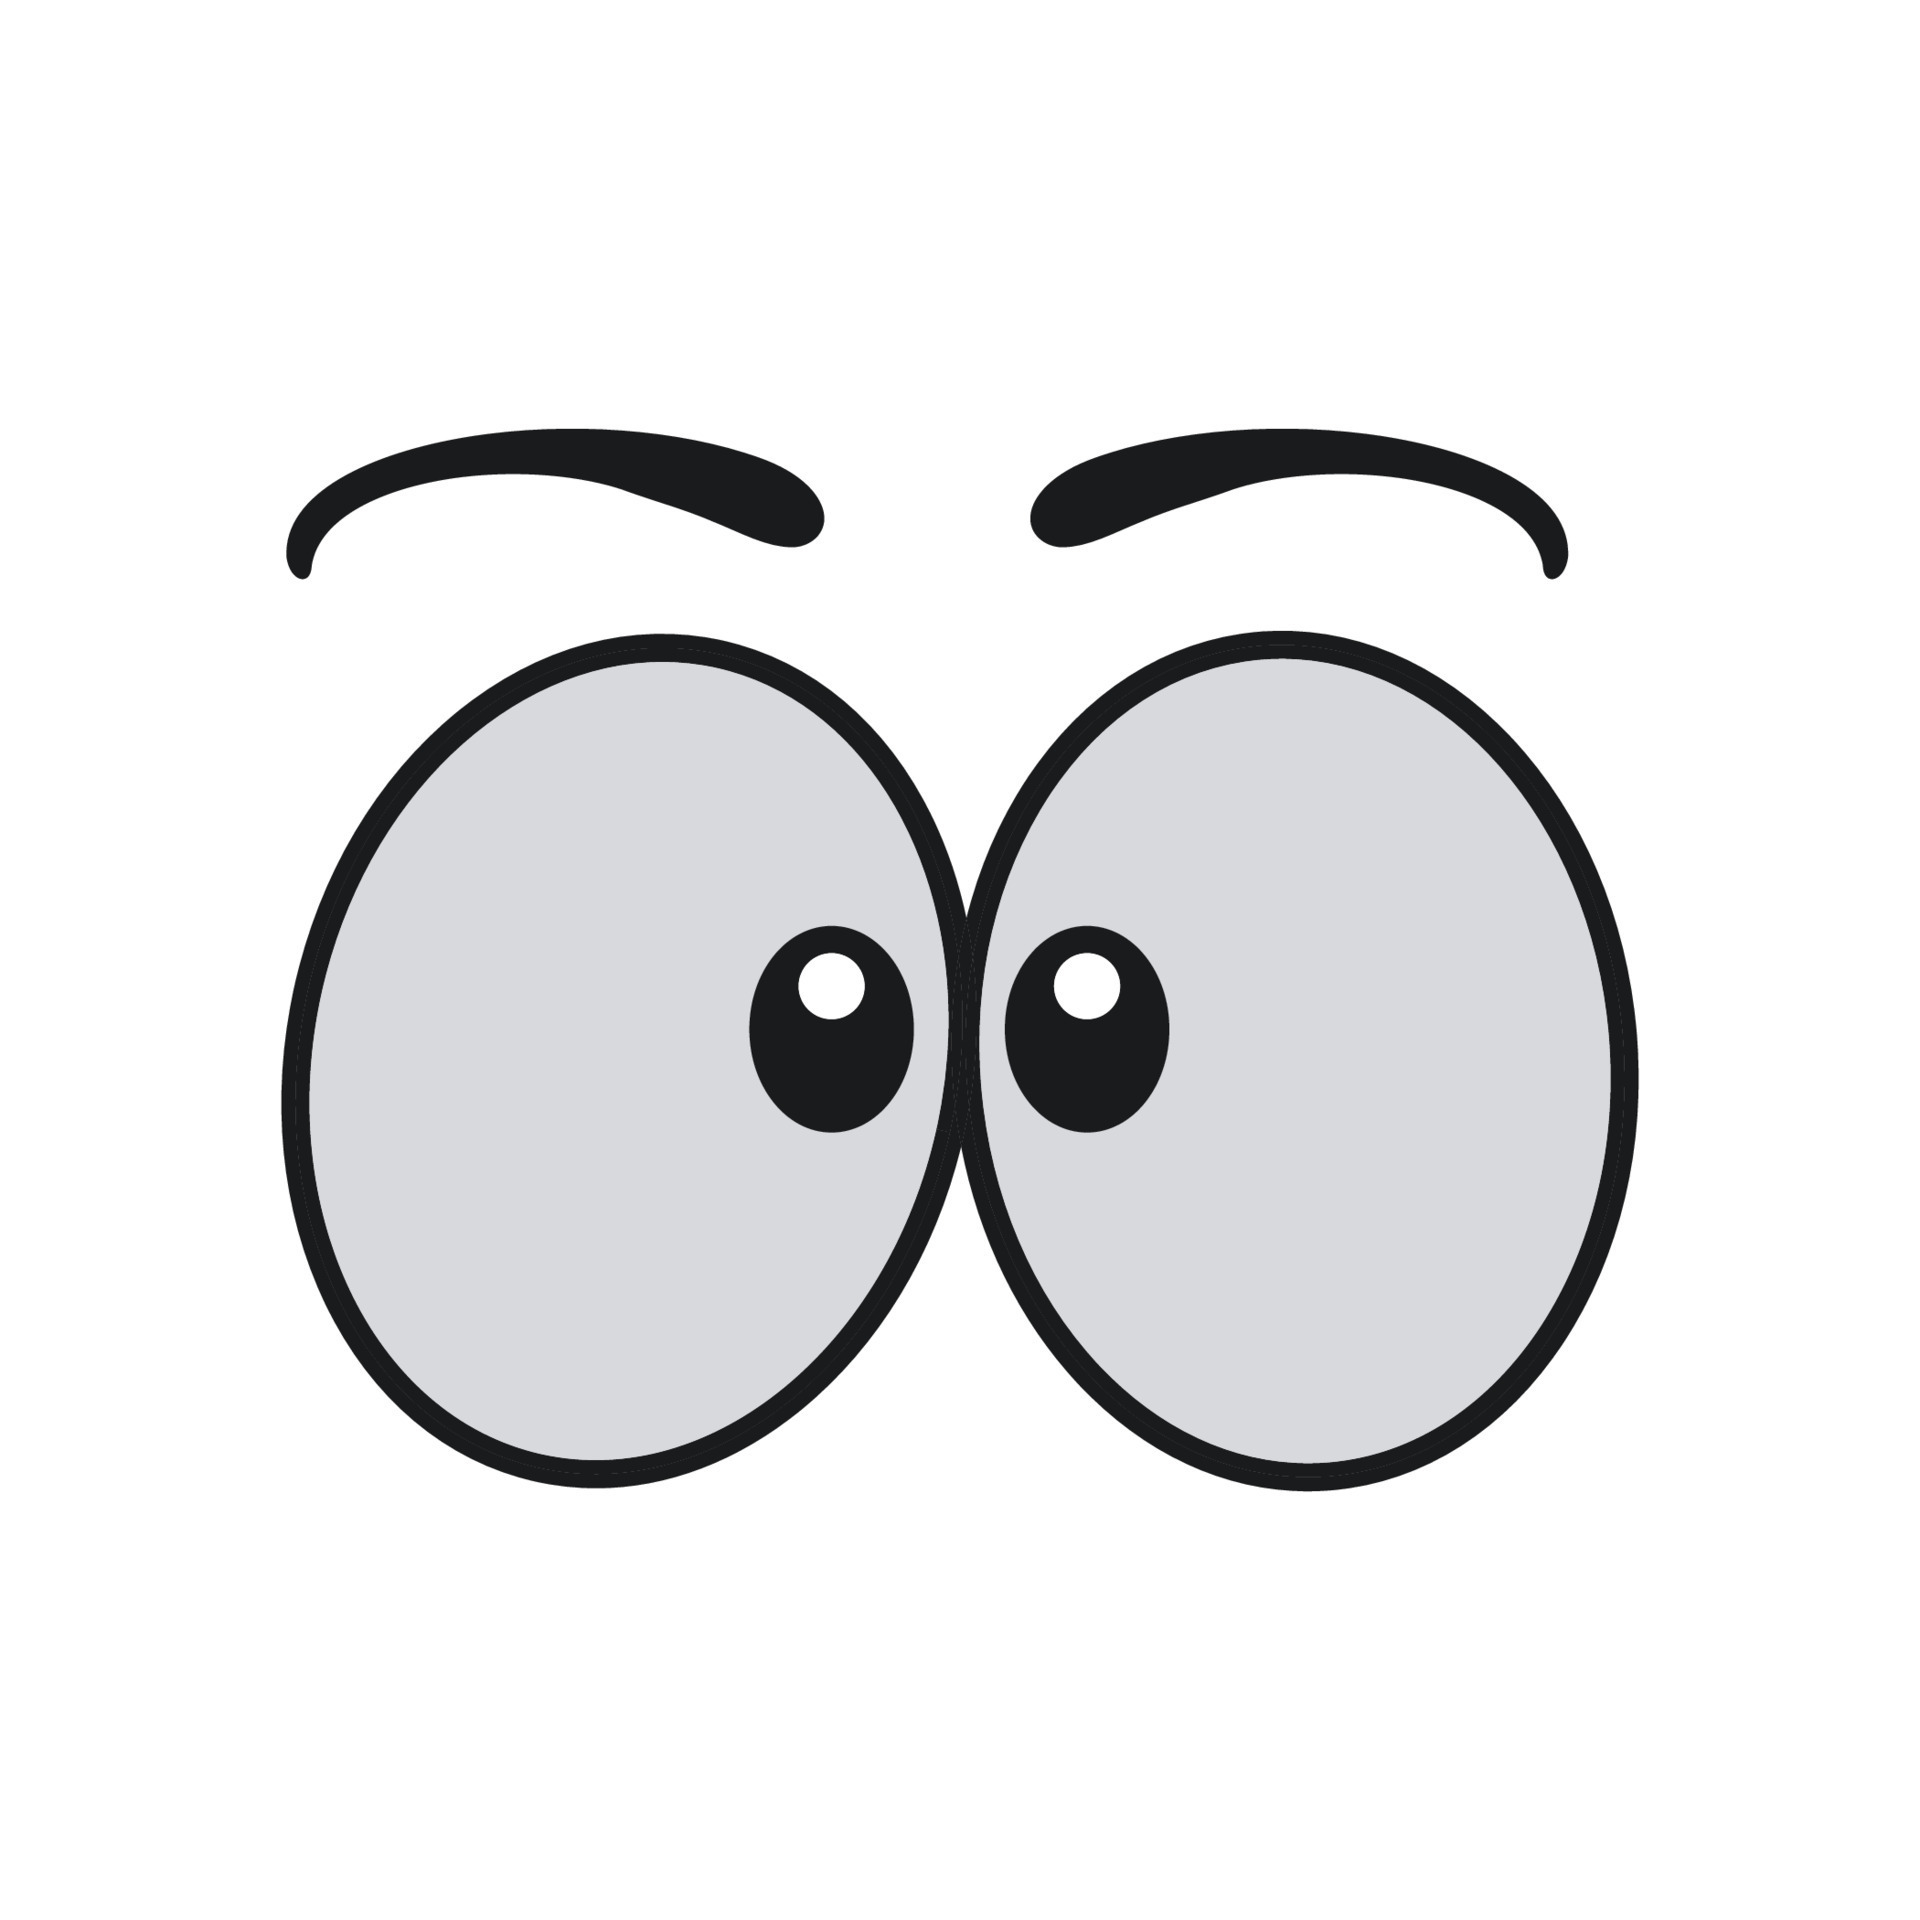 Comic eye cartoon vector illustration expression character icon. Face  emotion element symbol fun. Cute and happy eyebrow humor look person.  Eyeball emoticon looking art isolated white and human sign 10883108 Vector  Art